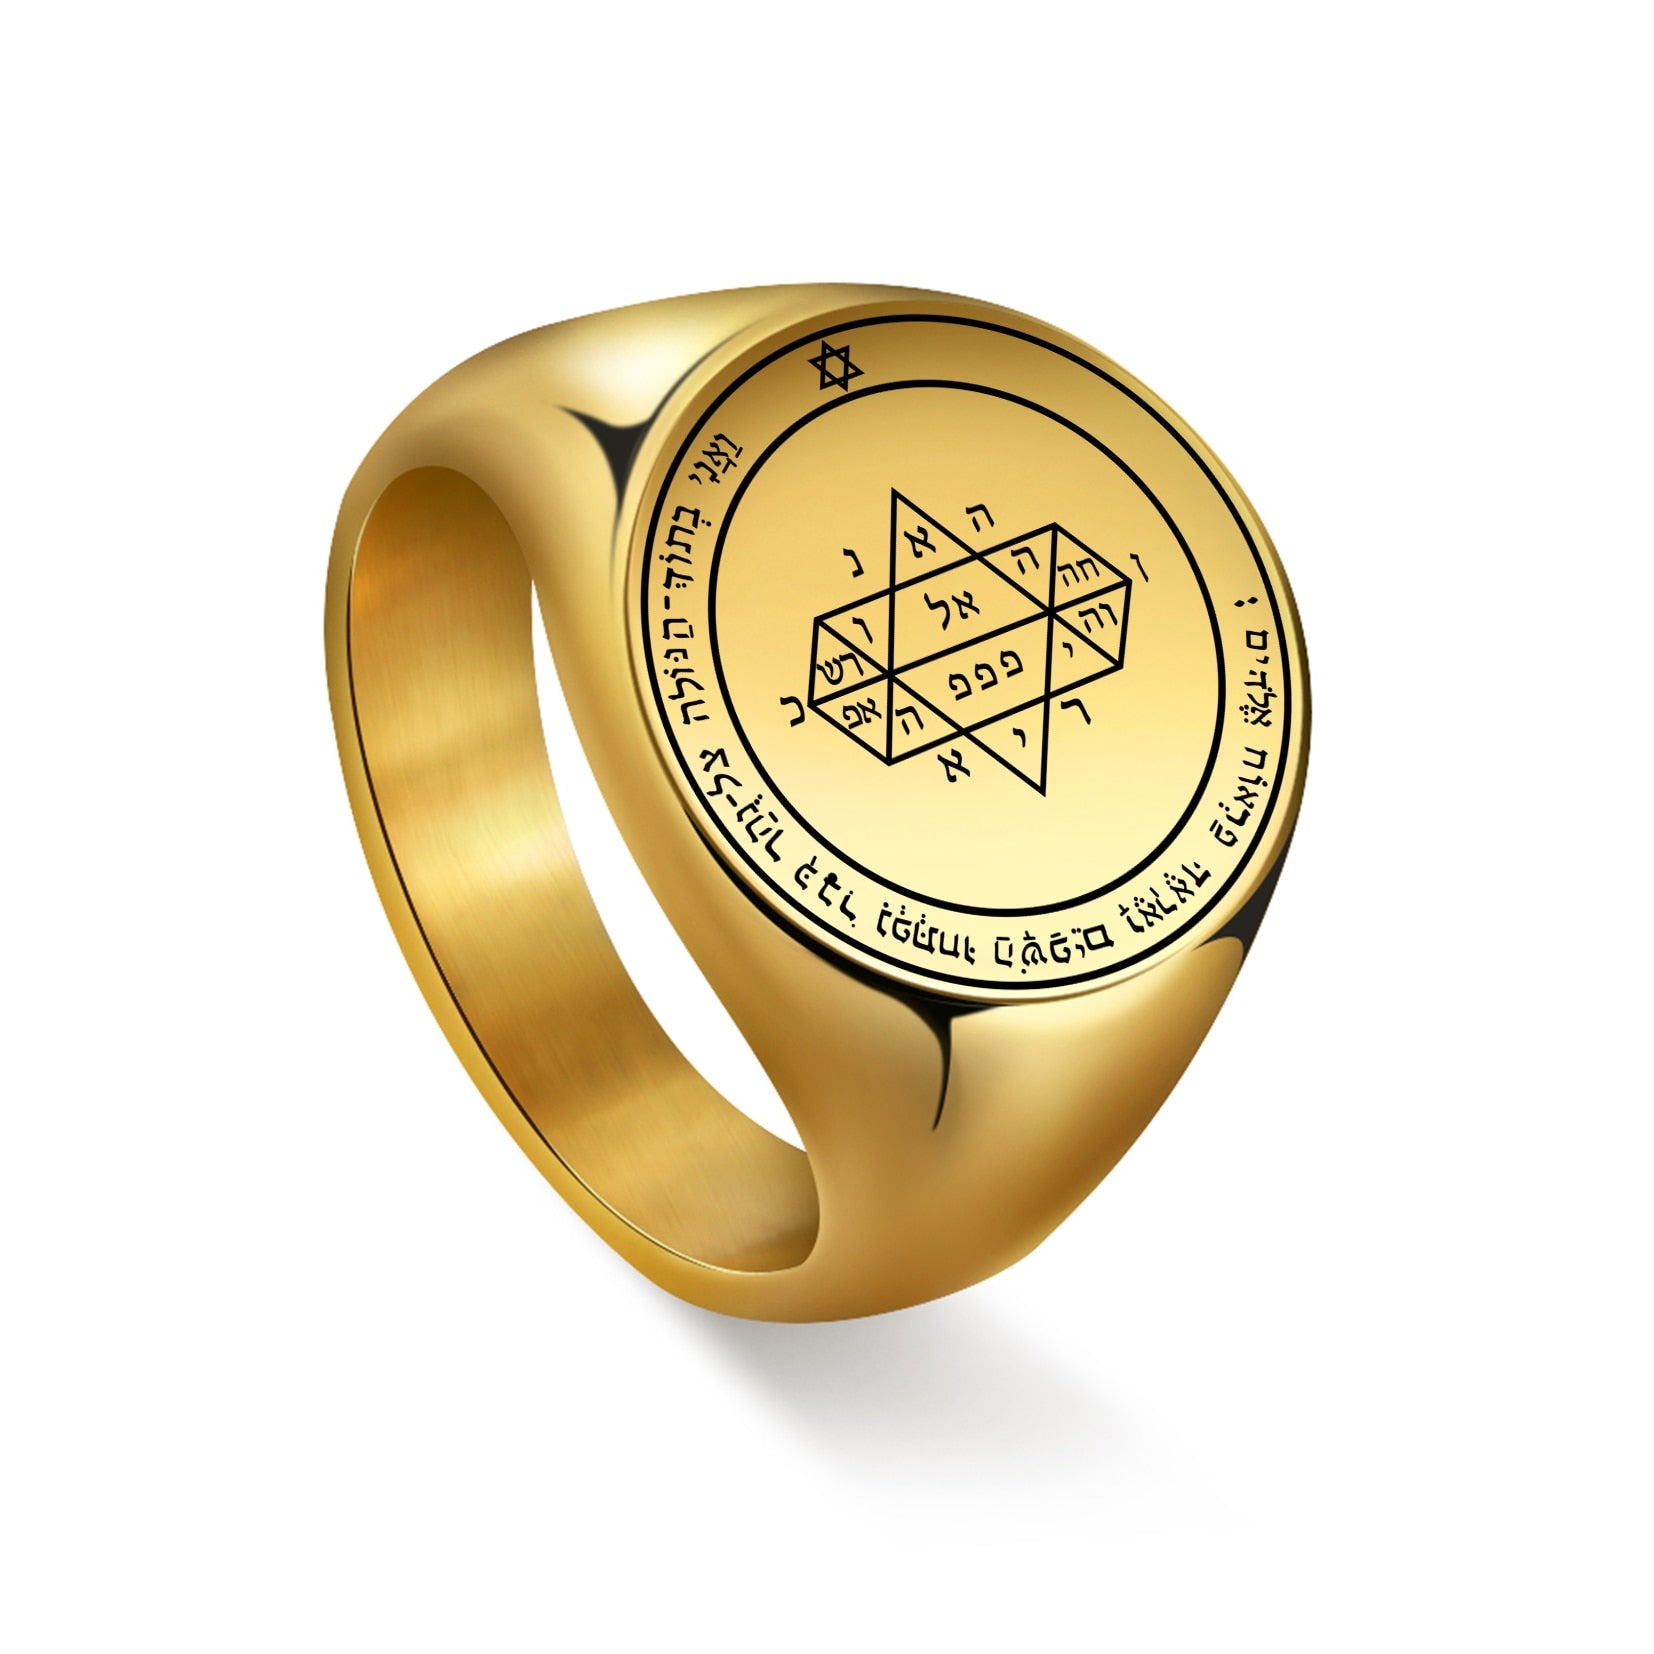 Key Of Solomon Pentacle Amulet Ring | Sigil Magick Talisman Jewelry | Sizes 9 & 10 Gold Plated Stainless Steel Rings | Apollo Tarot Shop